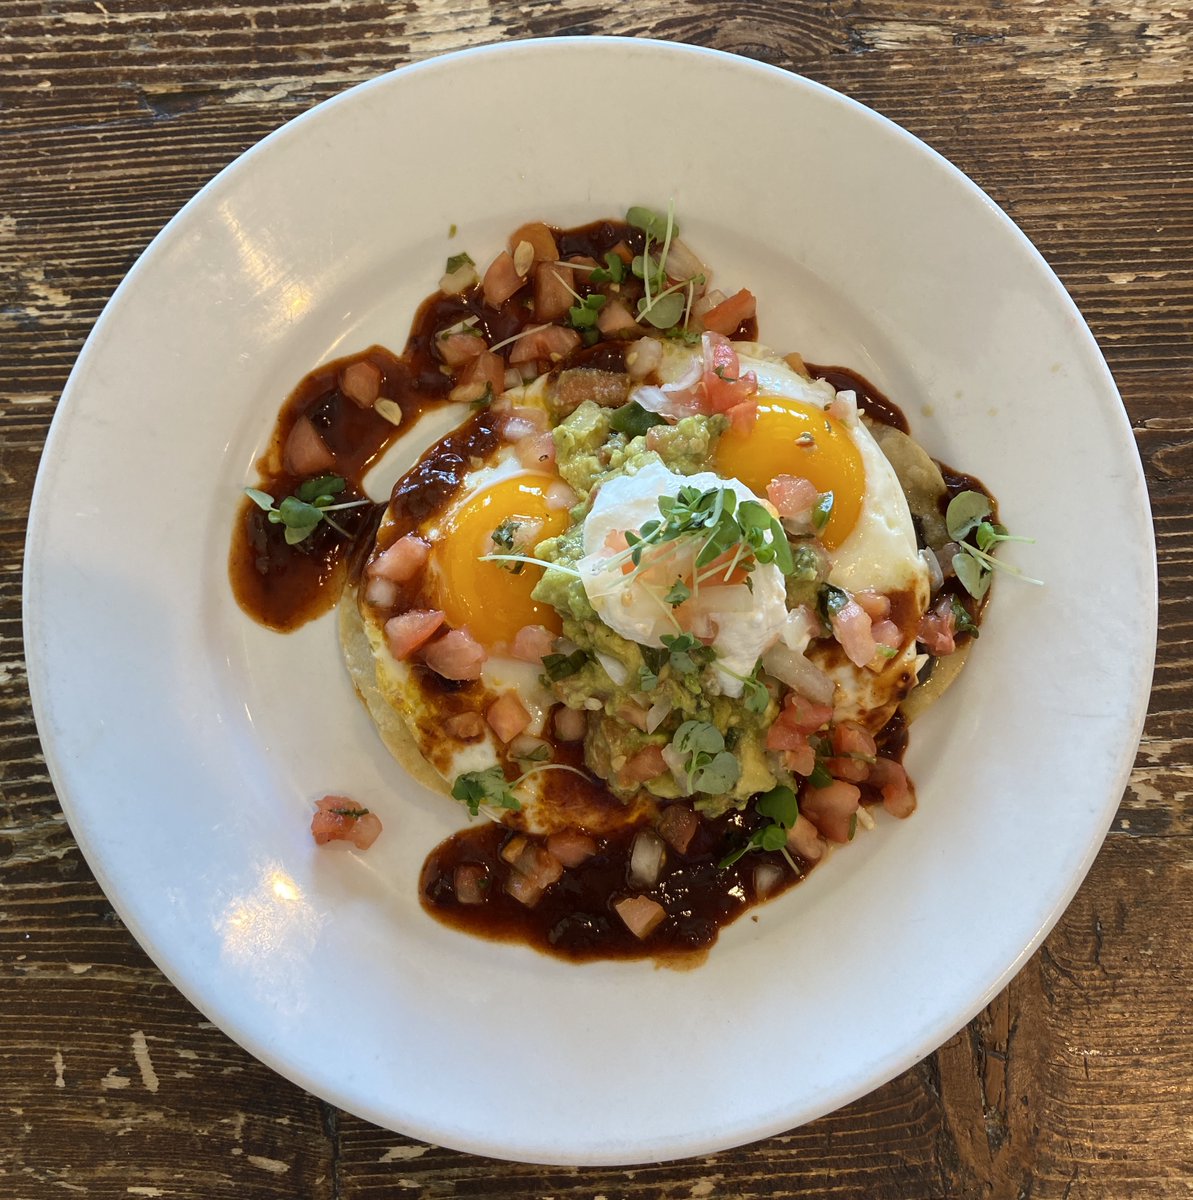 Begin your day with fresh flavors at the Grille at Somersett! Enjoy savory breakfast choices like Huevos Rancheros, Chicken Fried Steak, Breakfast Tacos, BYO Omelet and more. We serve breakfast from 8am-11am every Tuesday - Sunday.